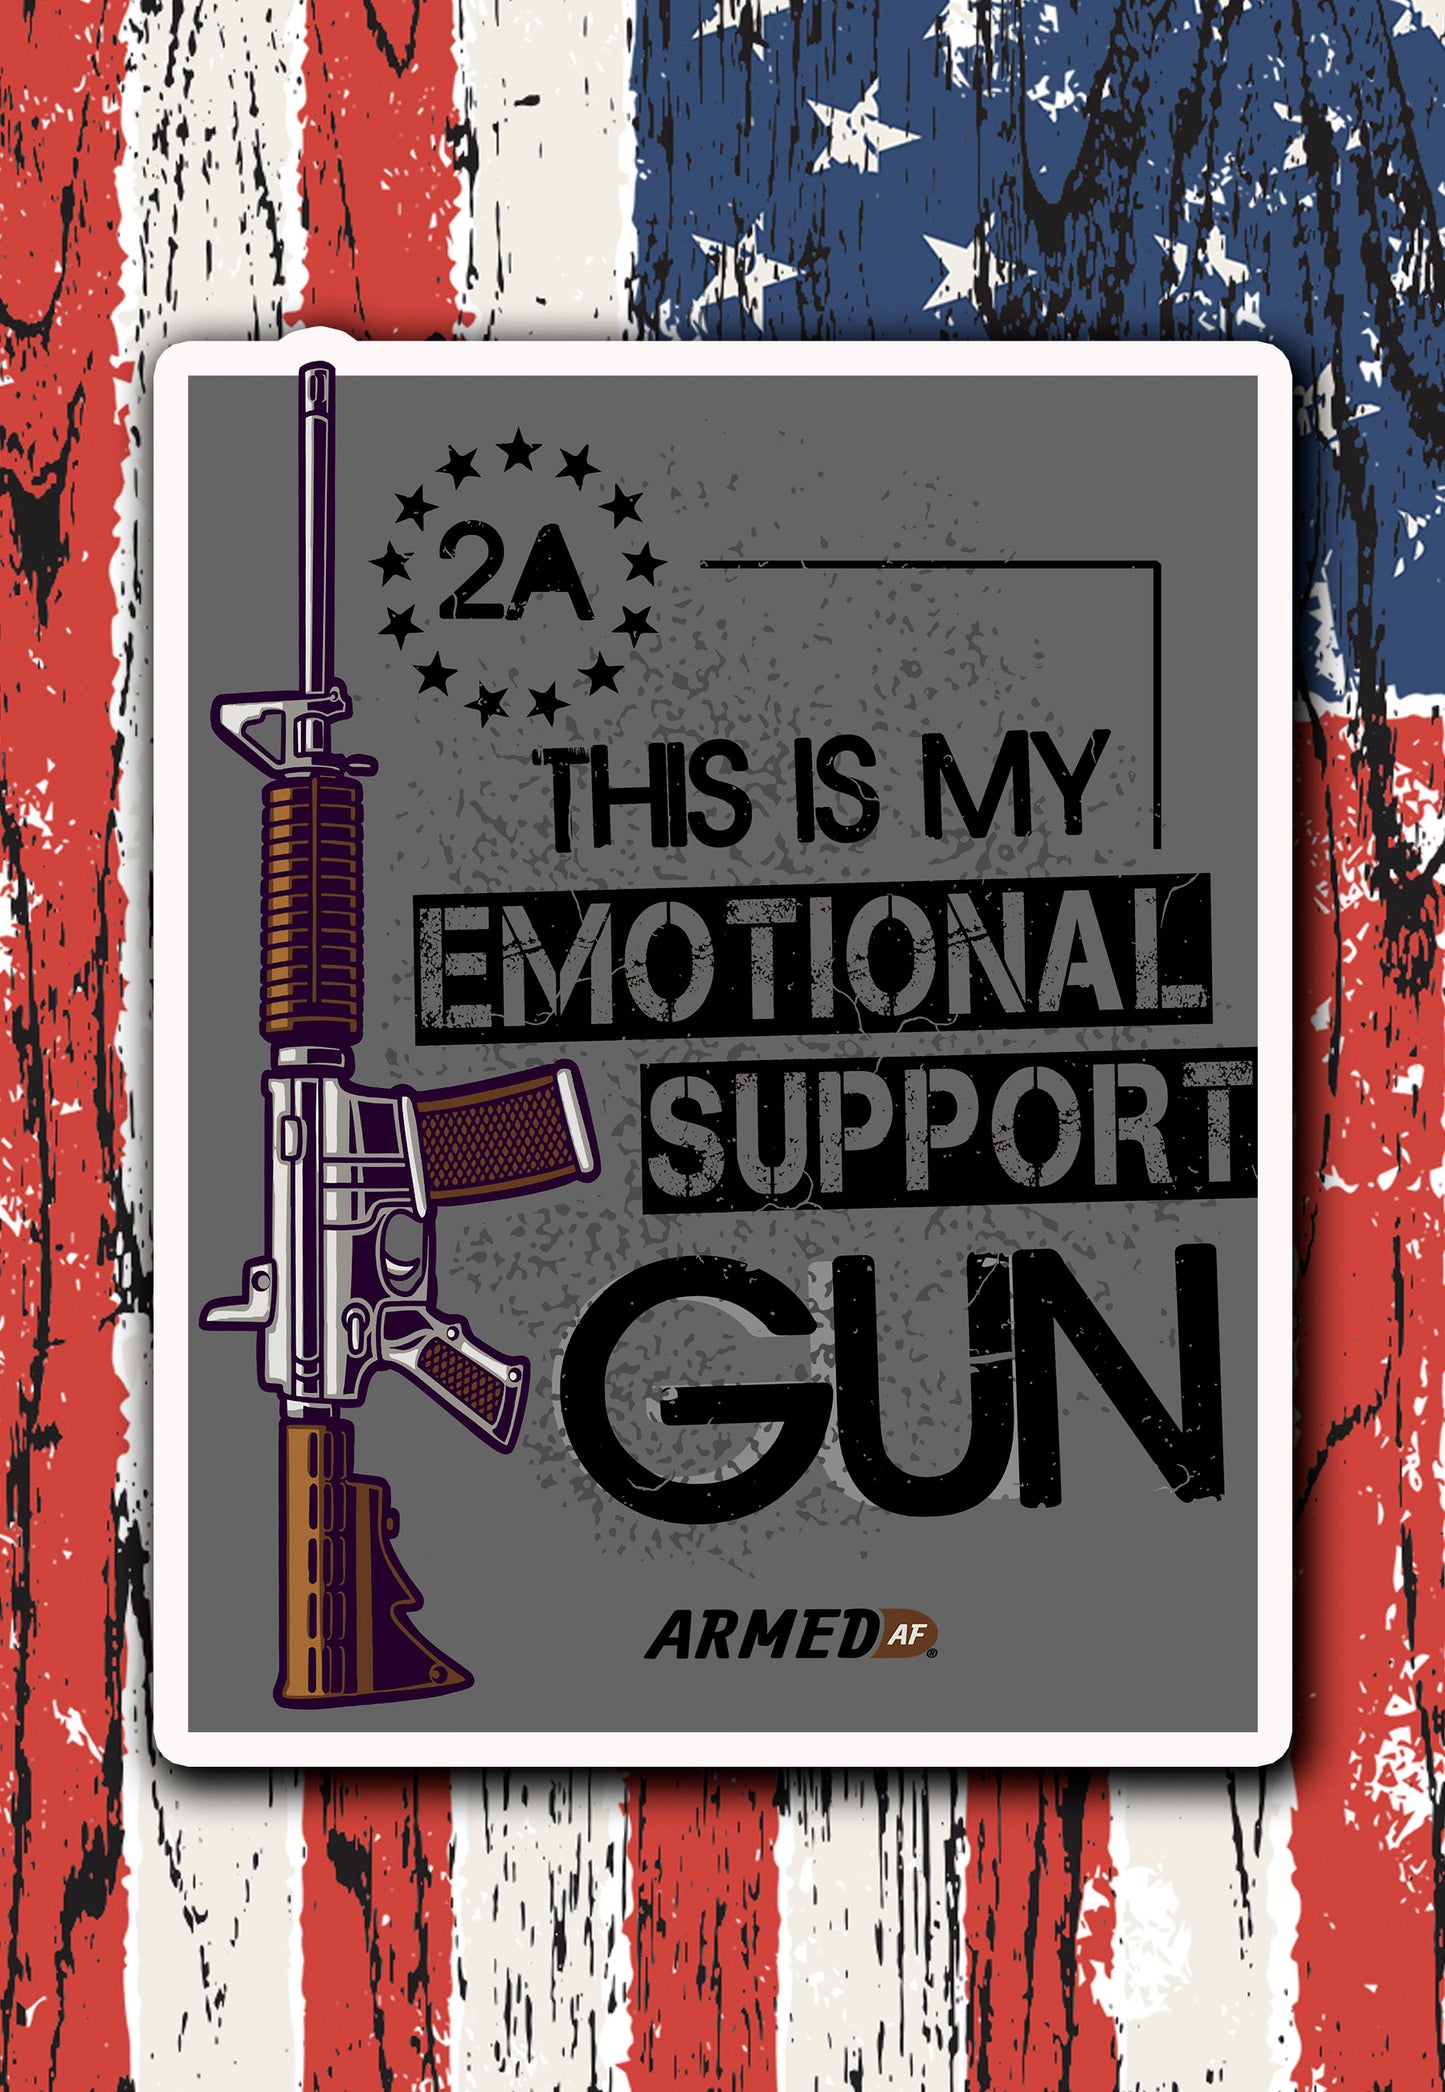 emotional support gun decal from armed af brand